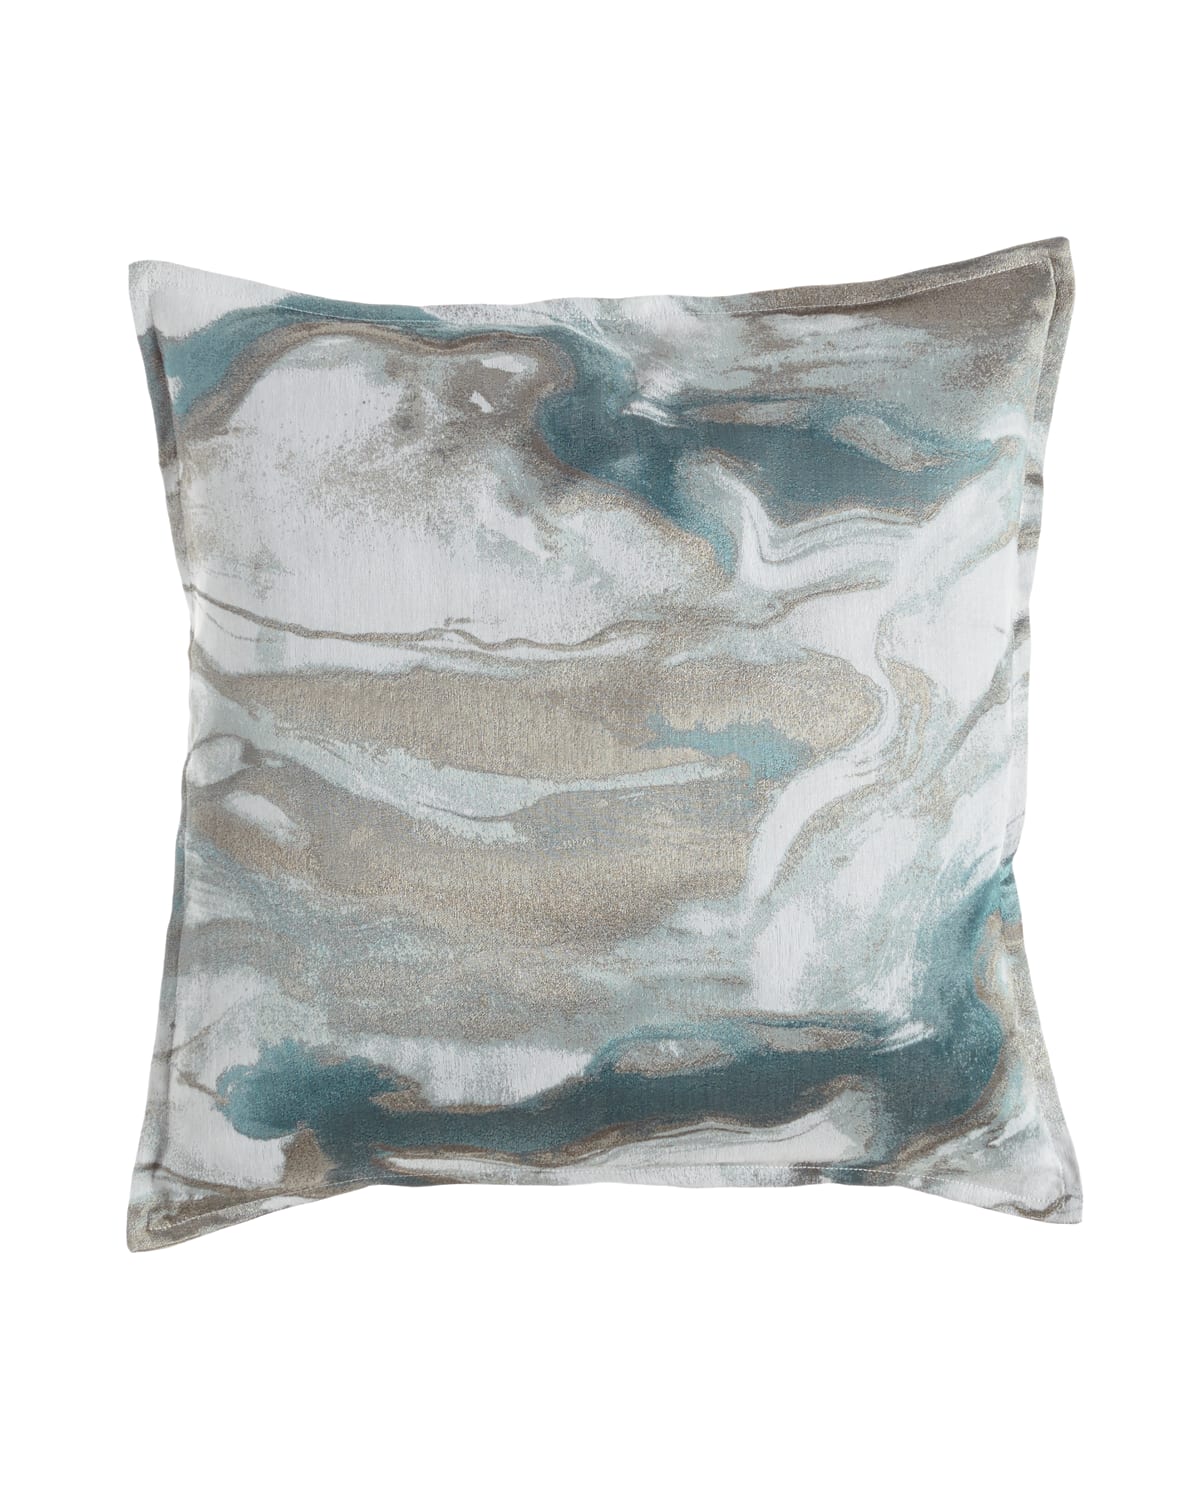 Image Isabella Collection by Kathy Fielder Caspin Marbled Pillow, 22"Sq.